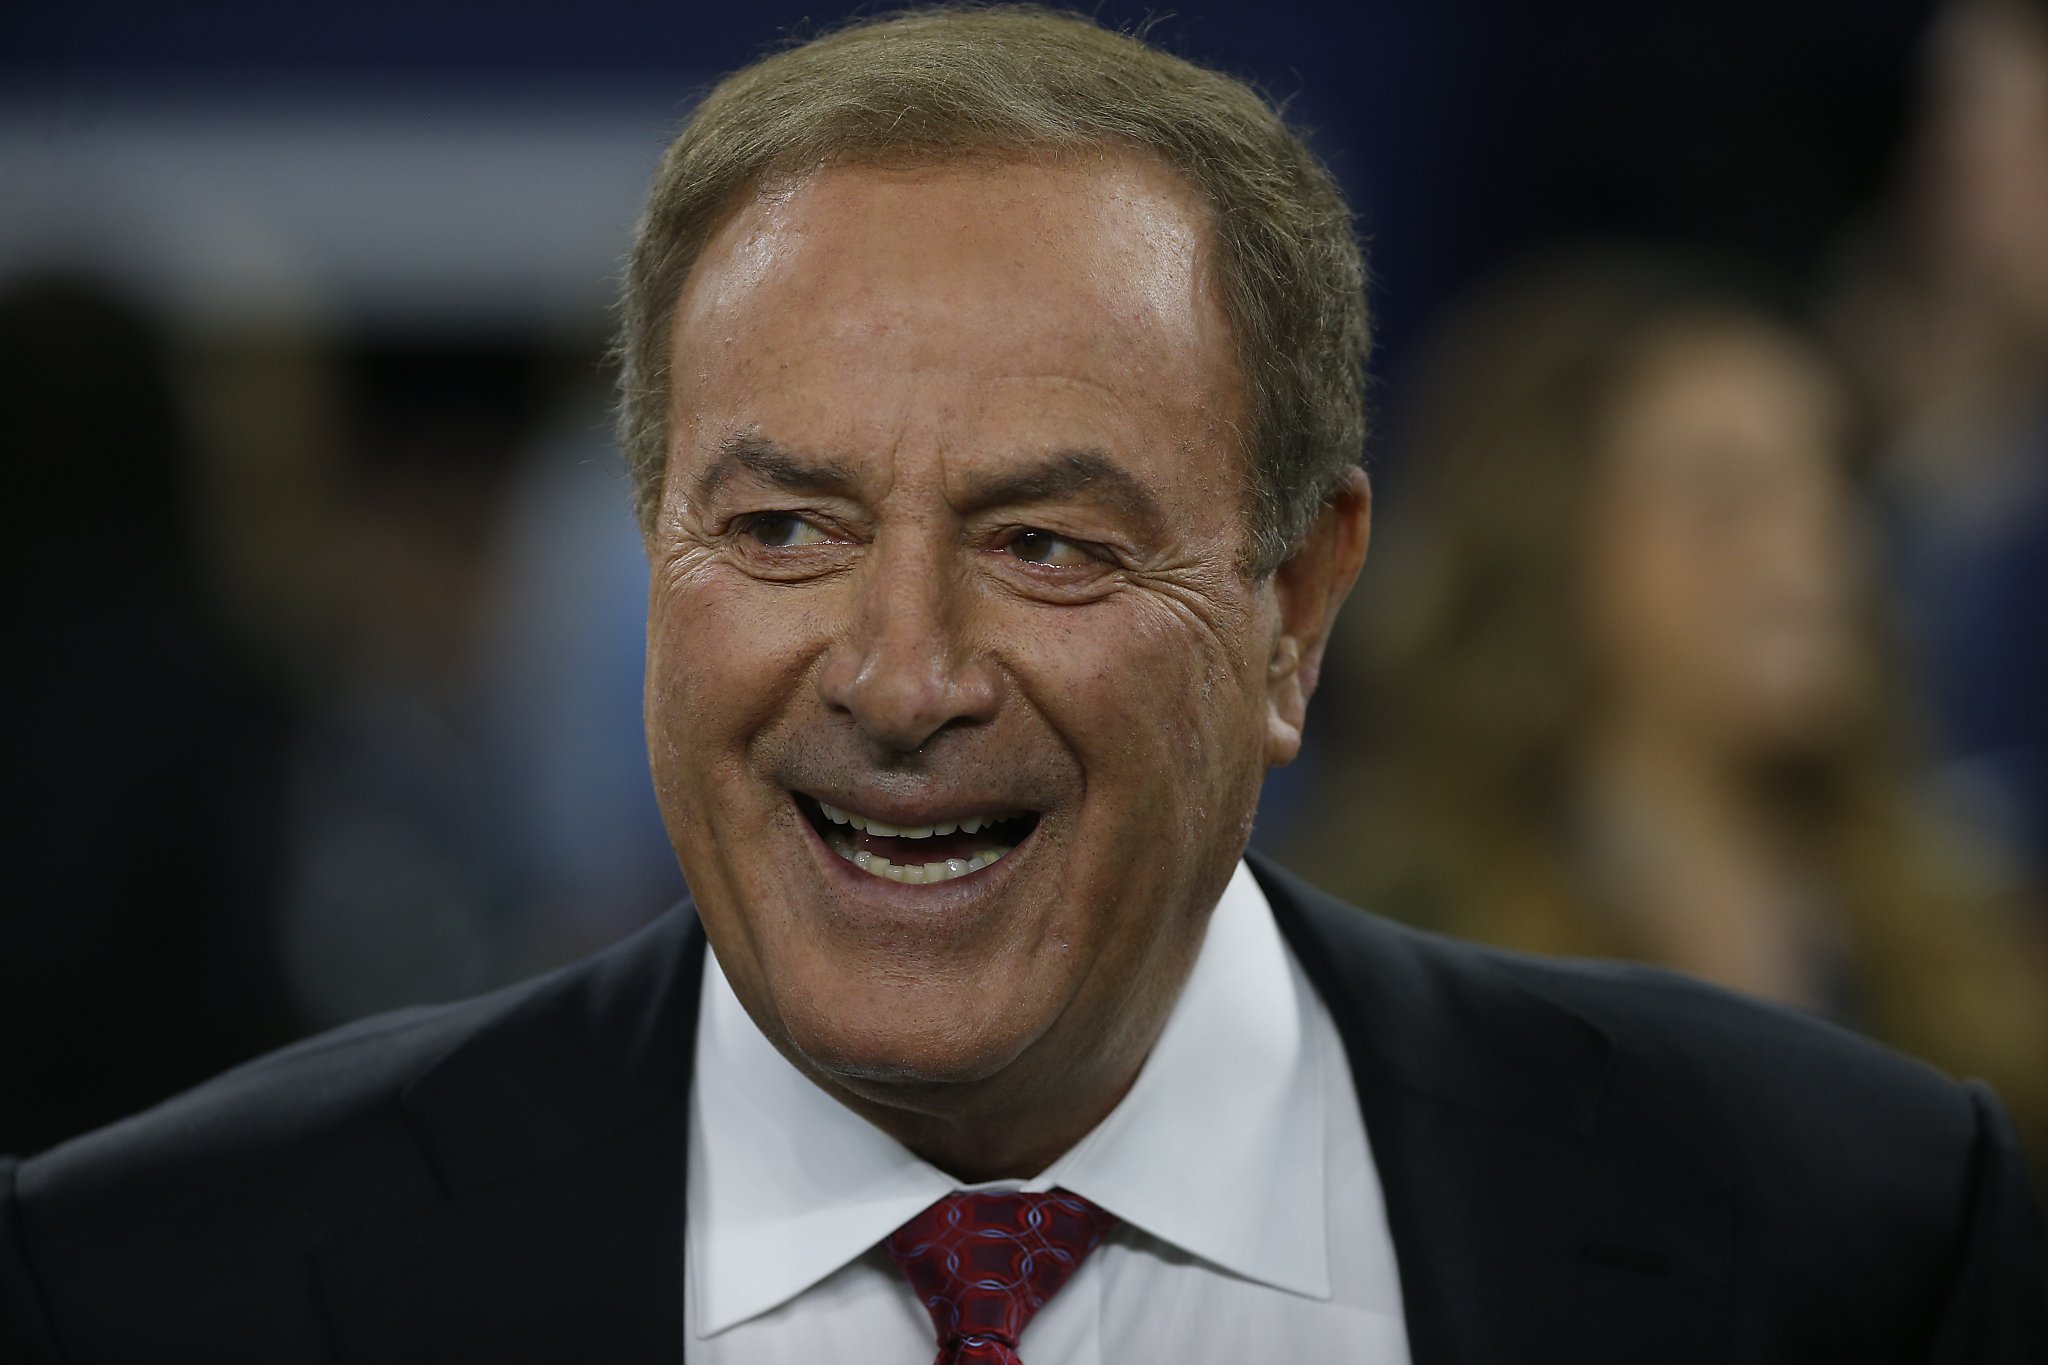 Why Did Al Michaels and Cris Collinsworth Part Ways in Broadcasting?